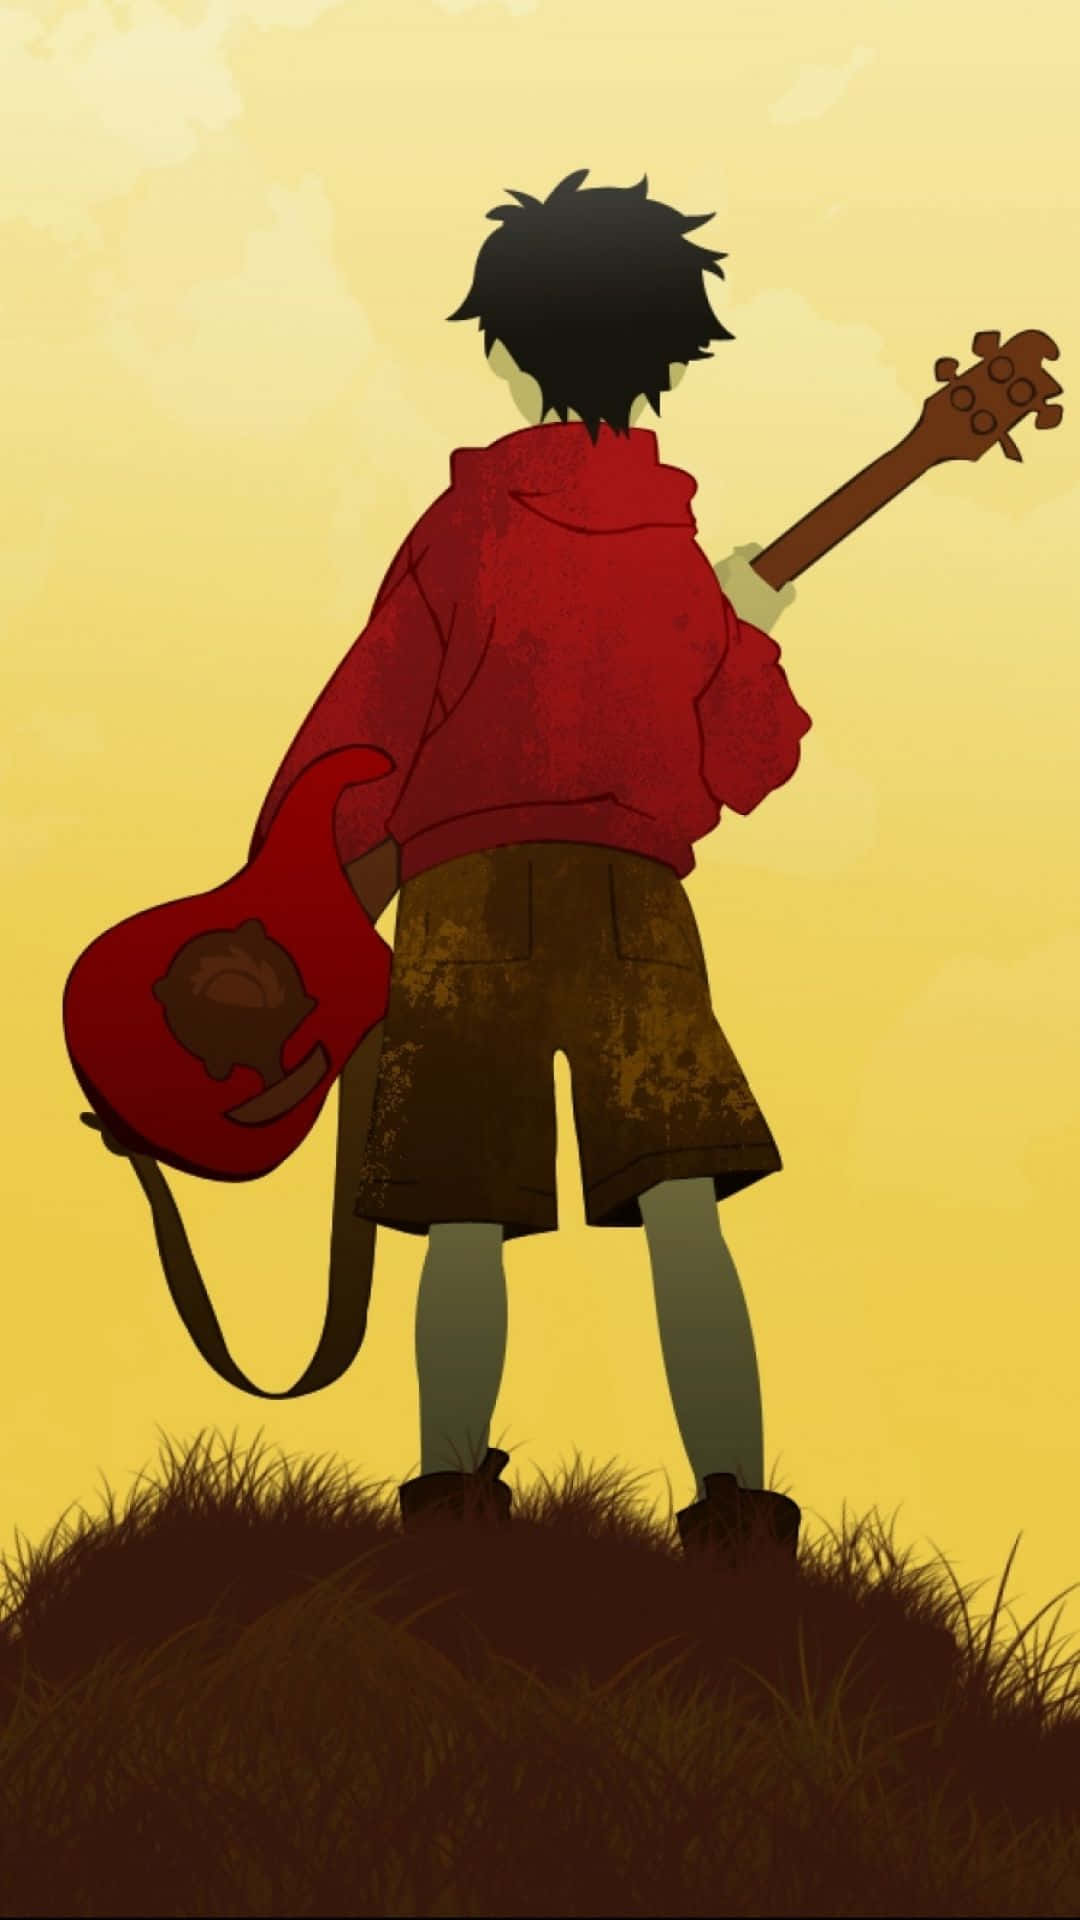 Get ready to get your socks knocked off by the craziness of FLCL.